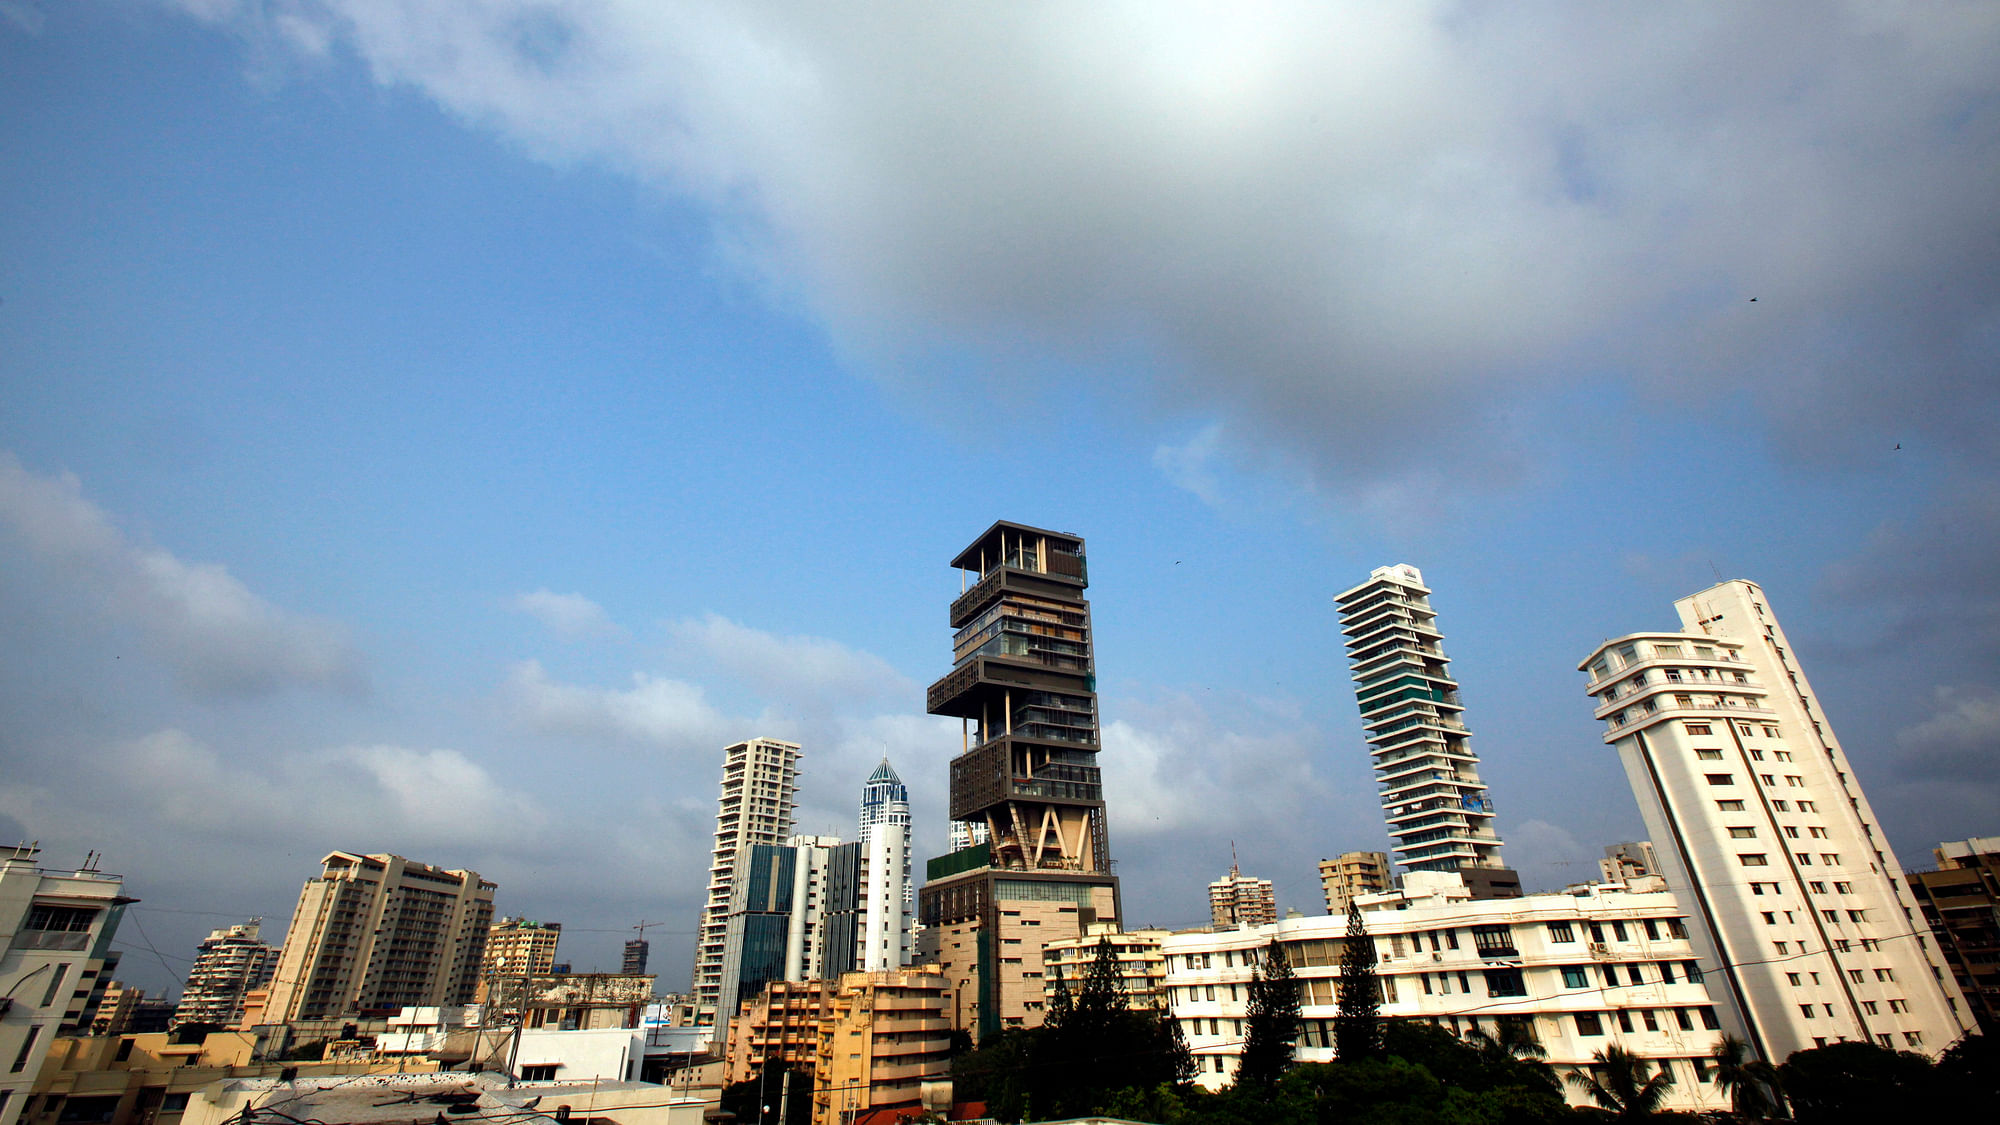 A view of the house of Mukesh Ambani, chairman of Indian energy company Reliance Industries, in Mumbai.